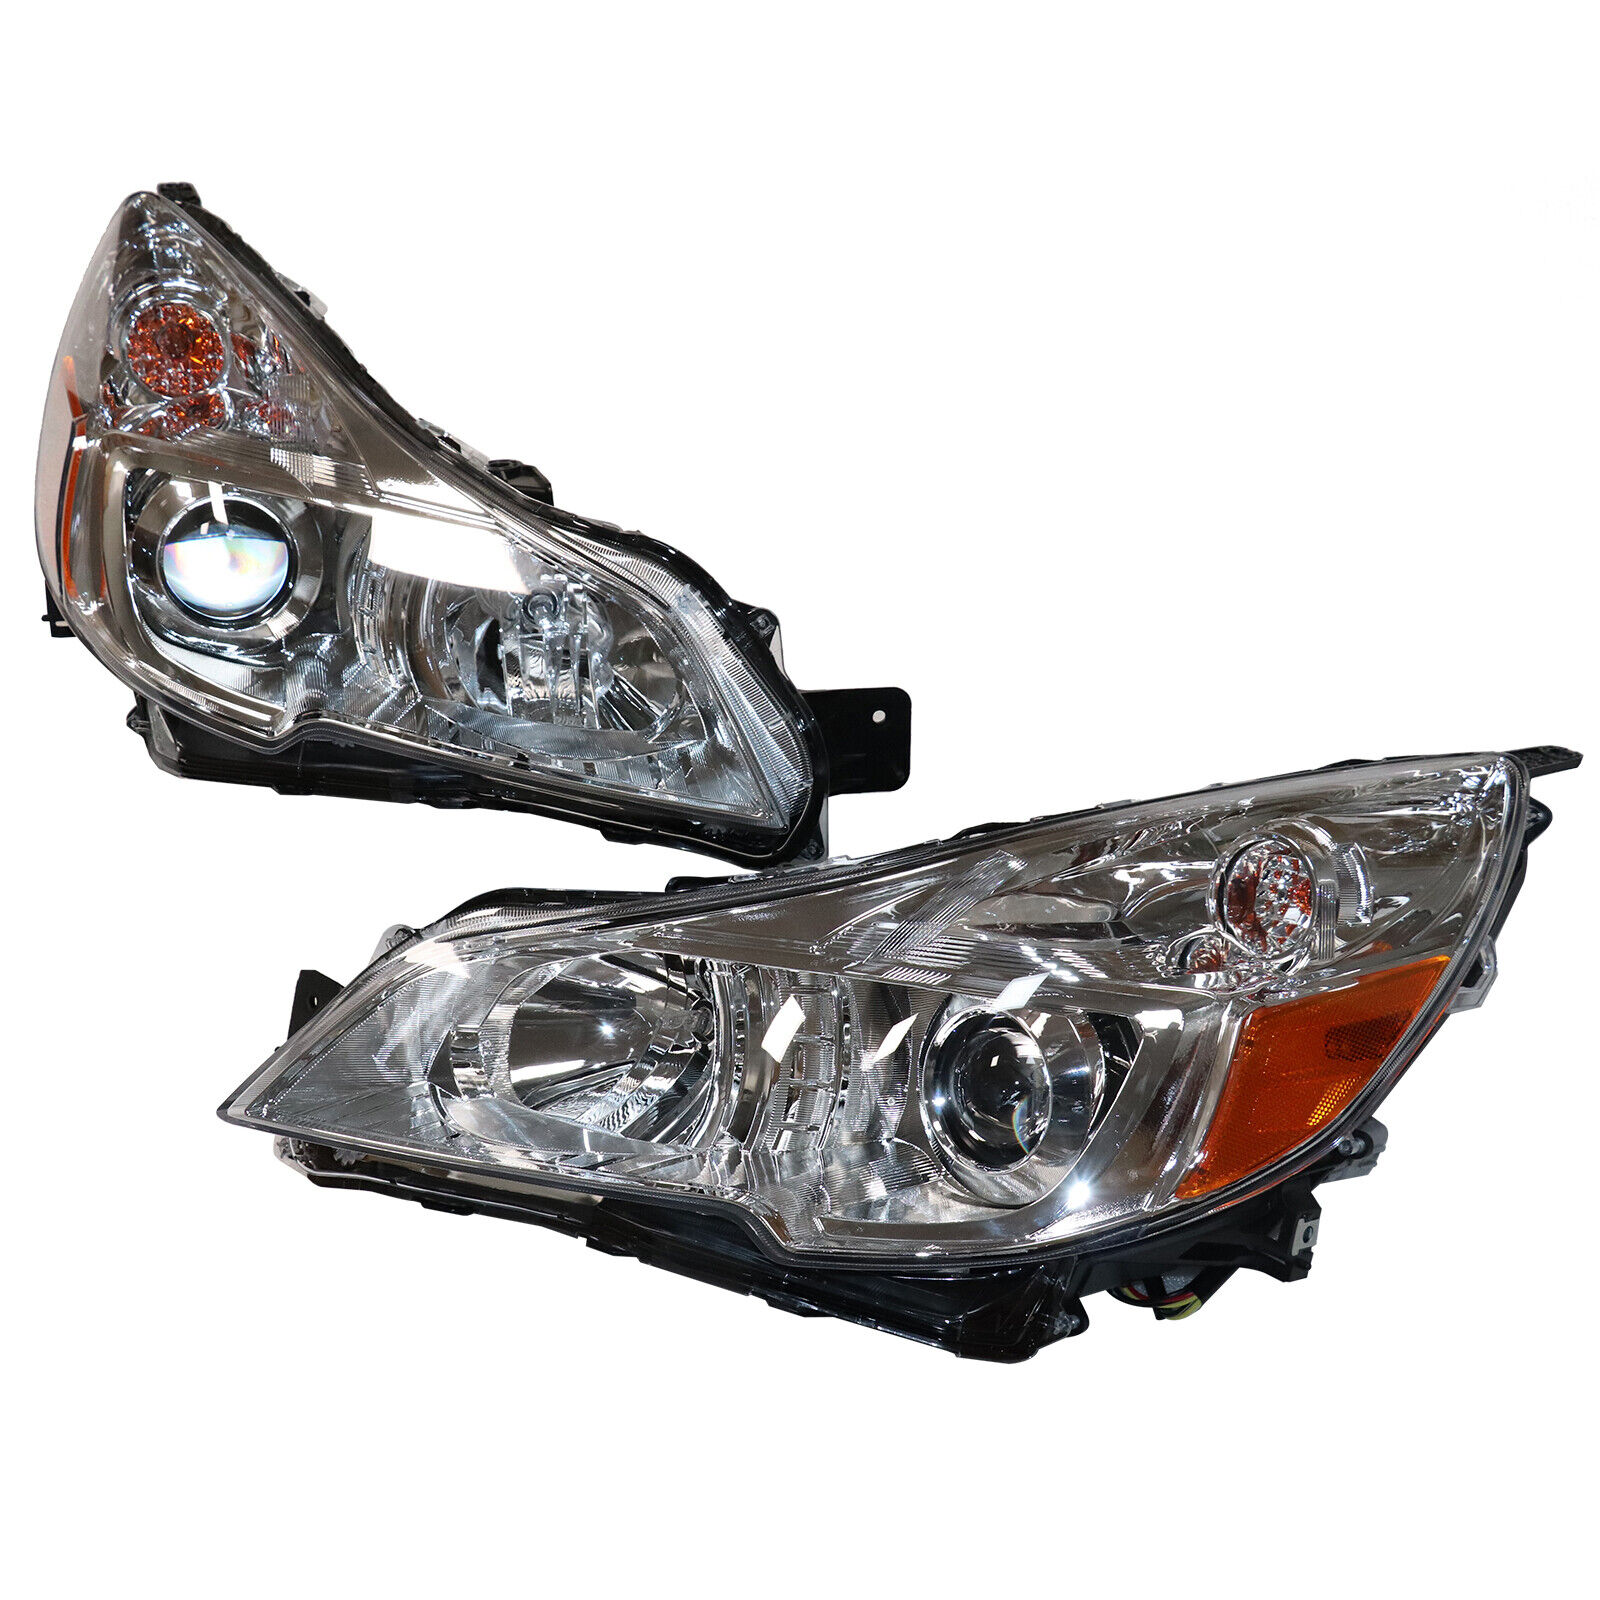 For 2010-2014 Subaru Legacy/Outback Replacement Projector Chrome Pair Headlights